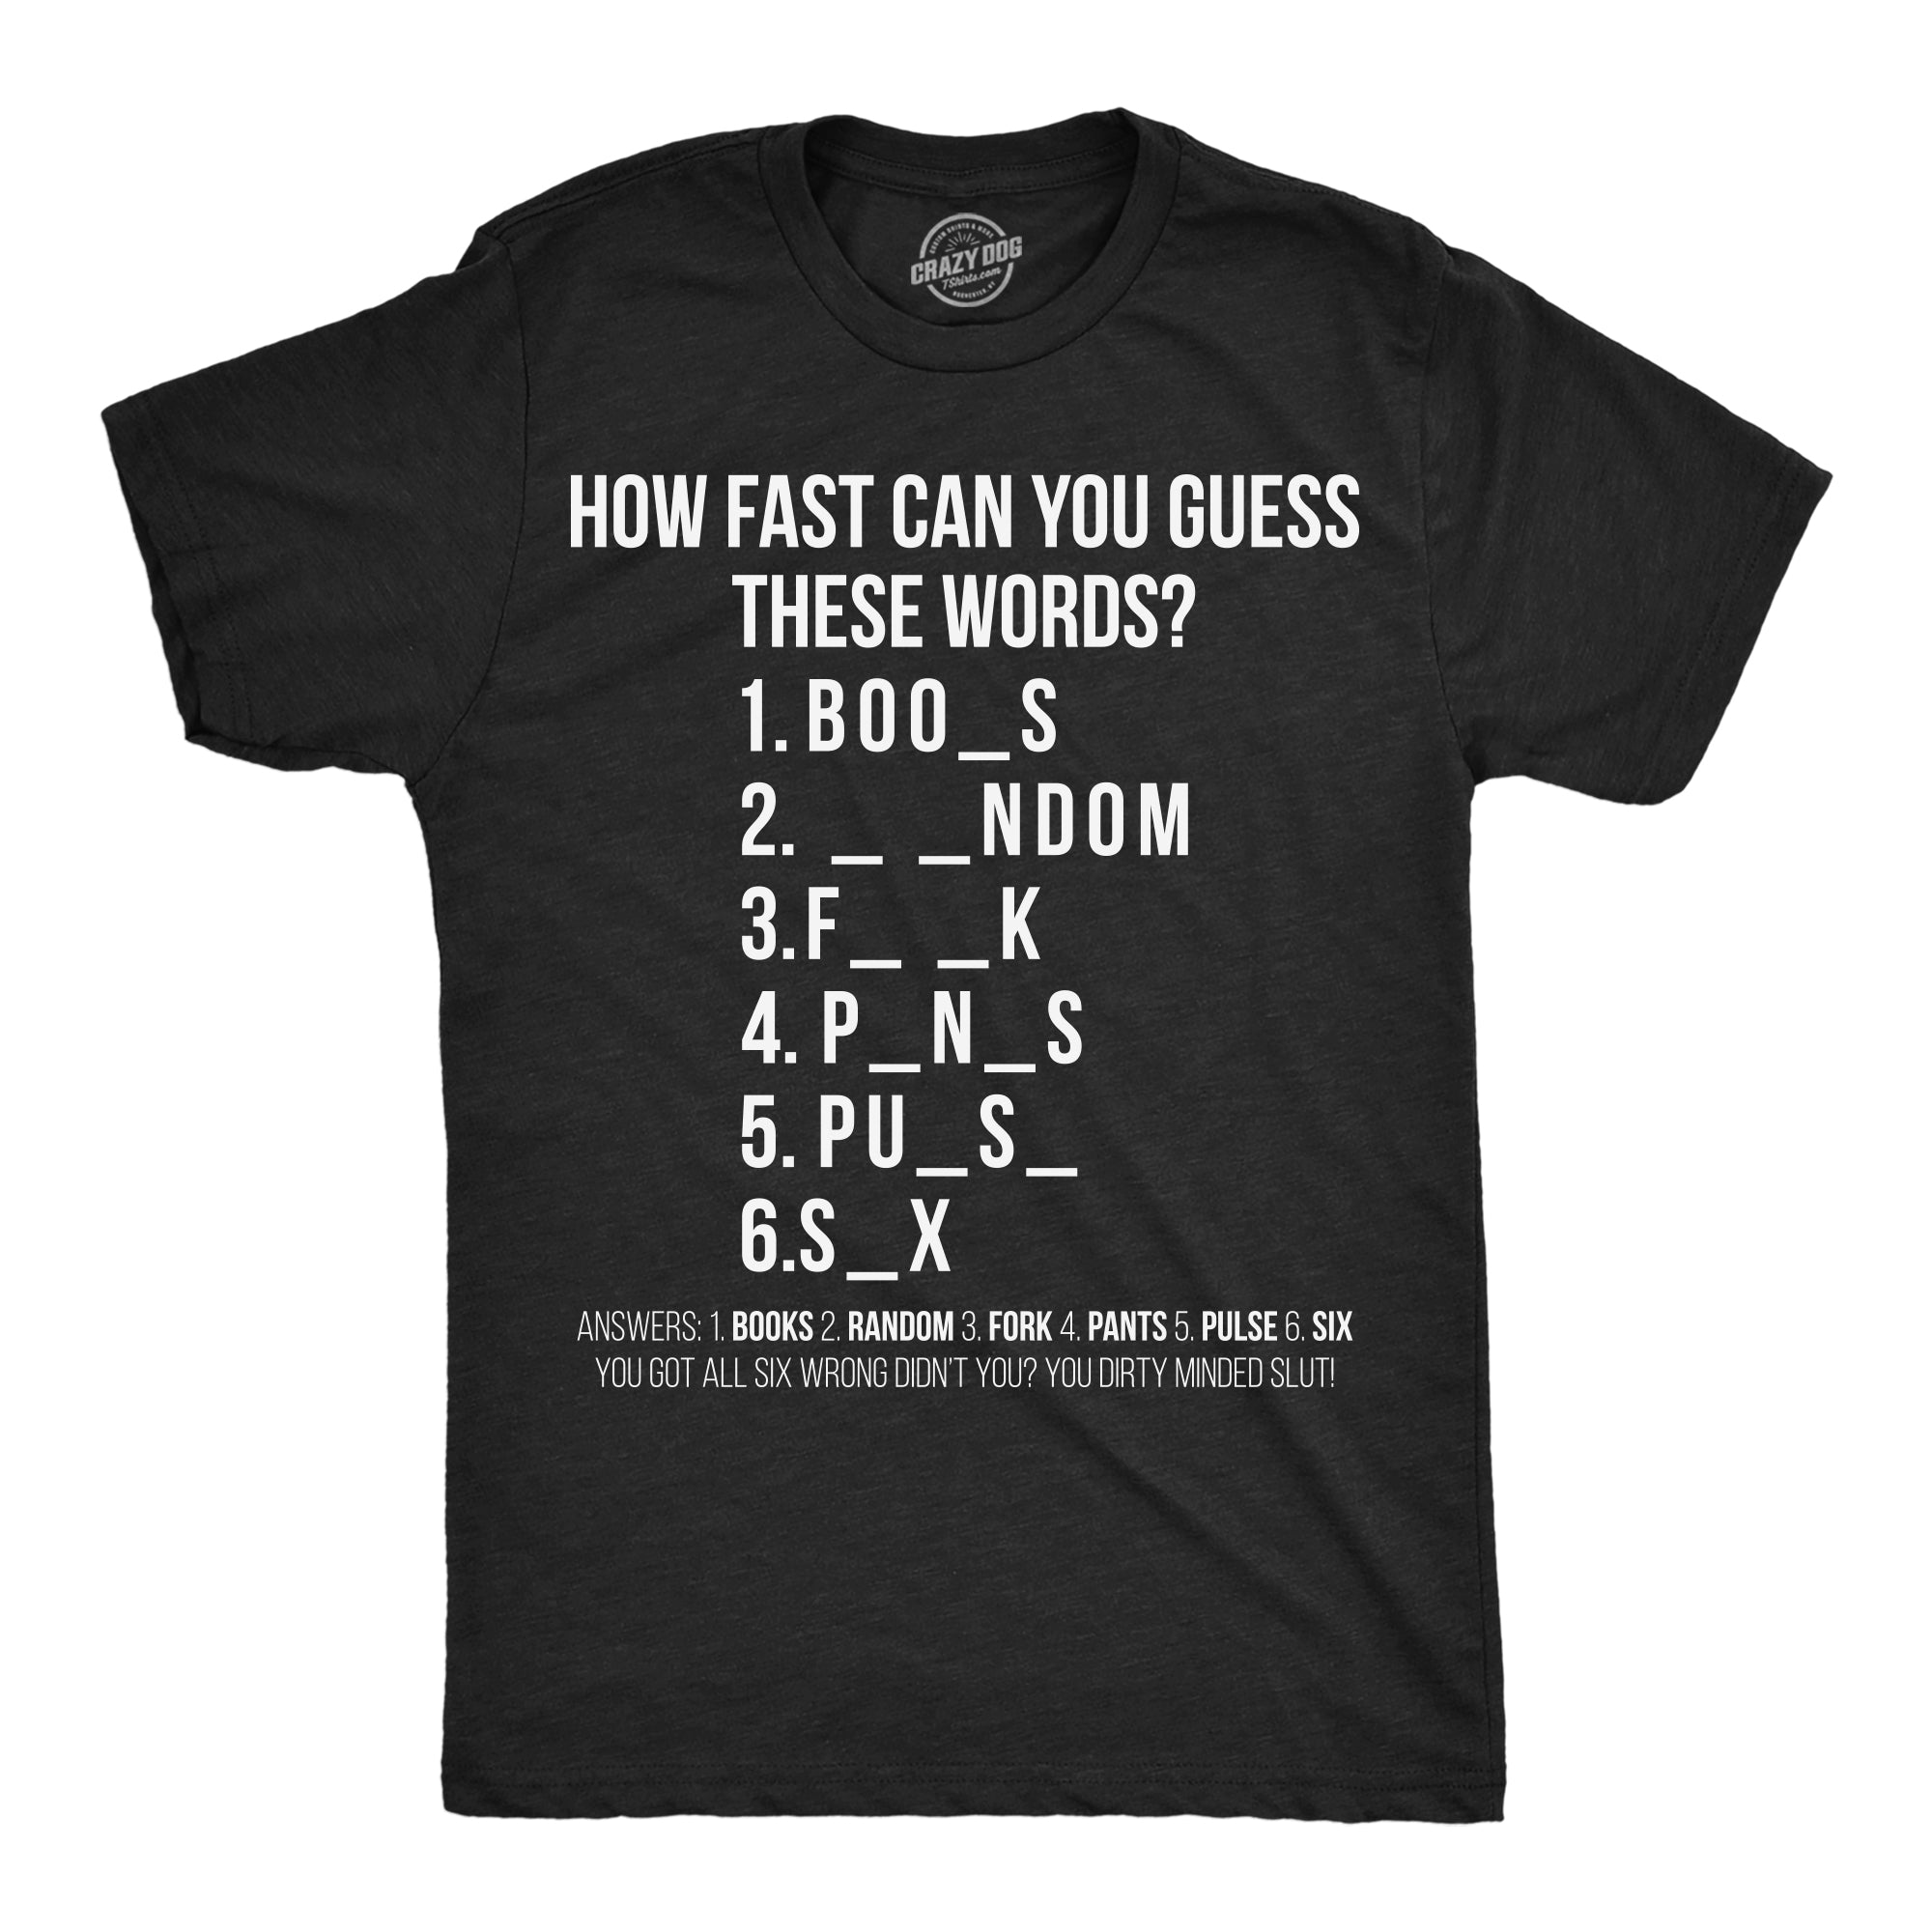 Funny Heather Black - How Fast Can You Guess These Words How Fast Can You Guess These Words Mens T Shirt Nerdy sarcastic Tee